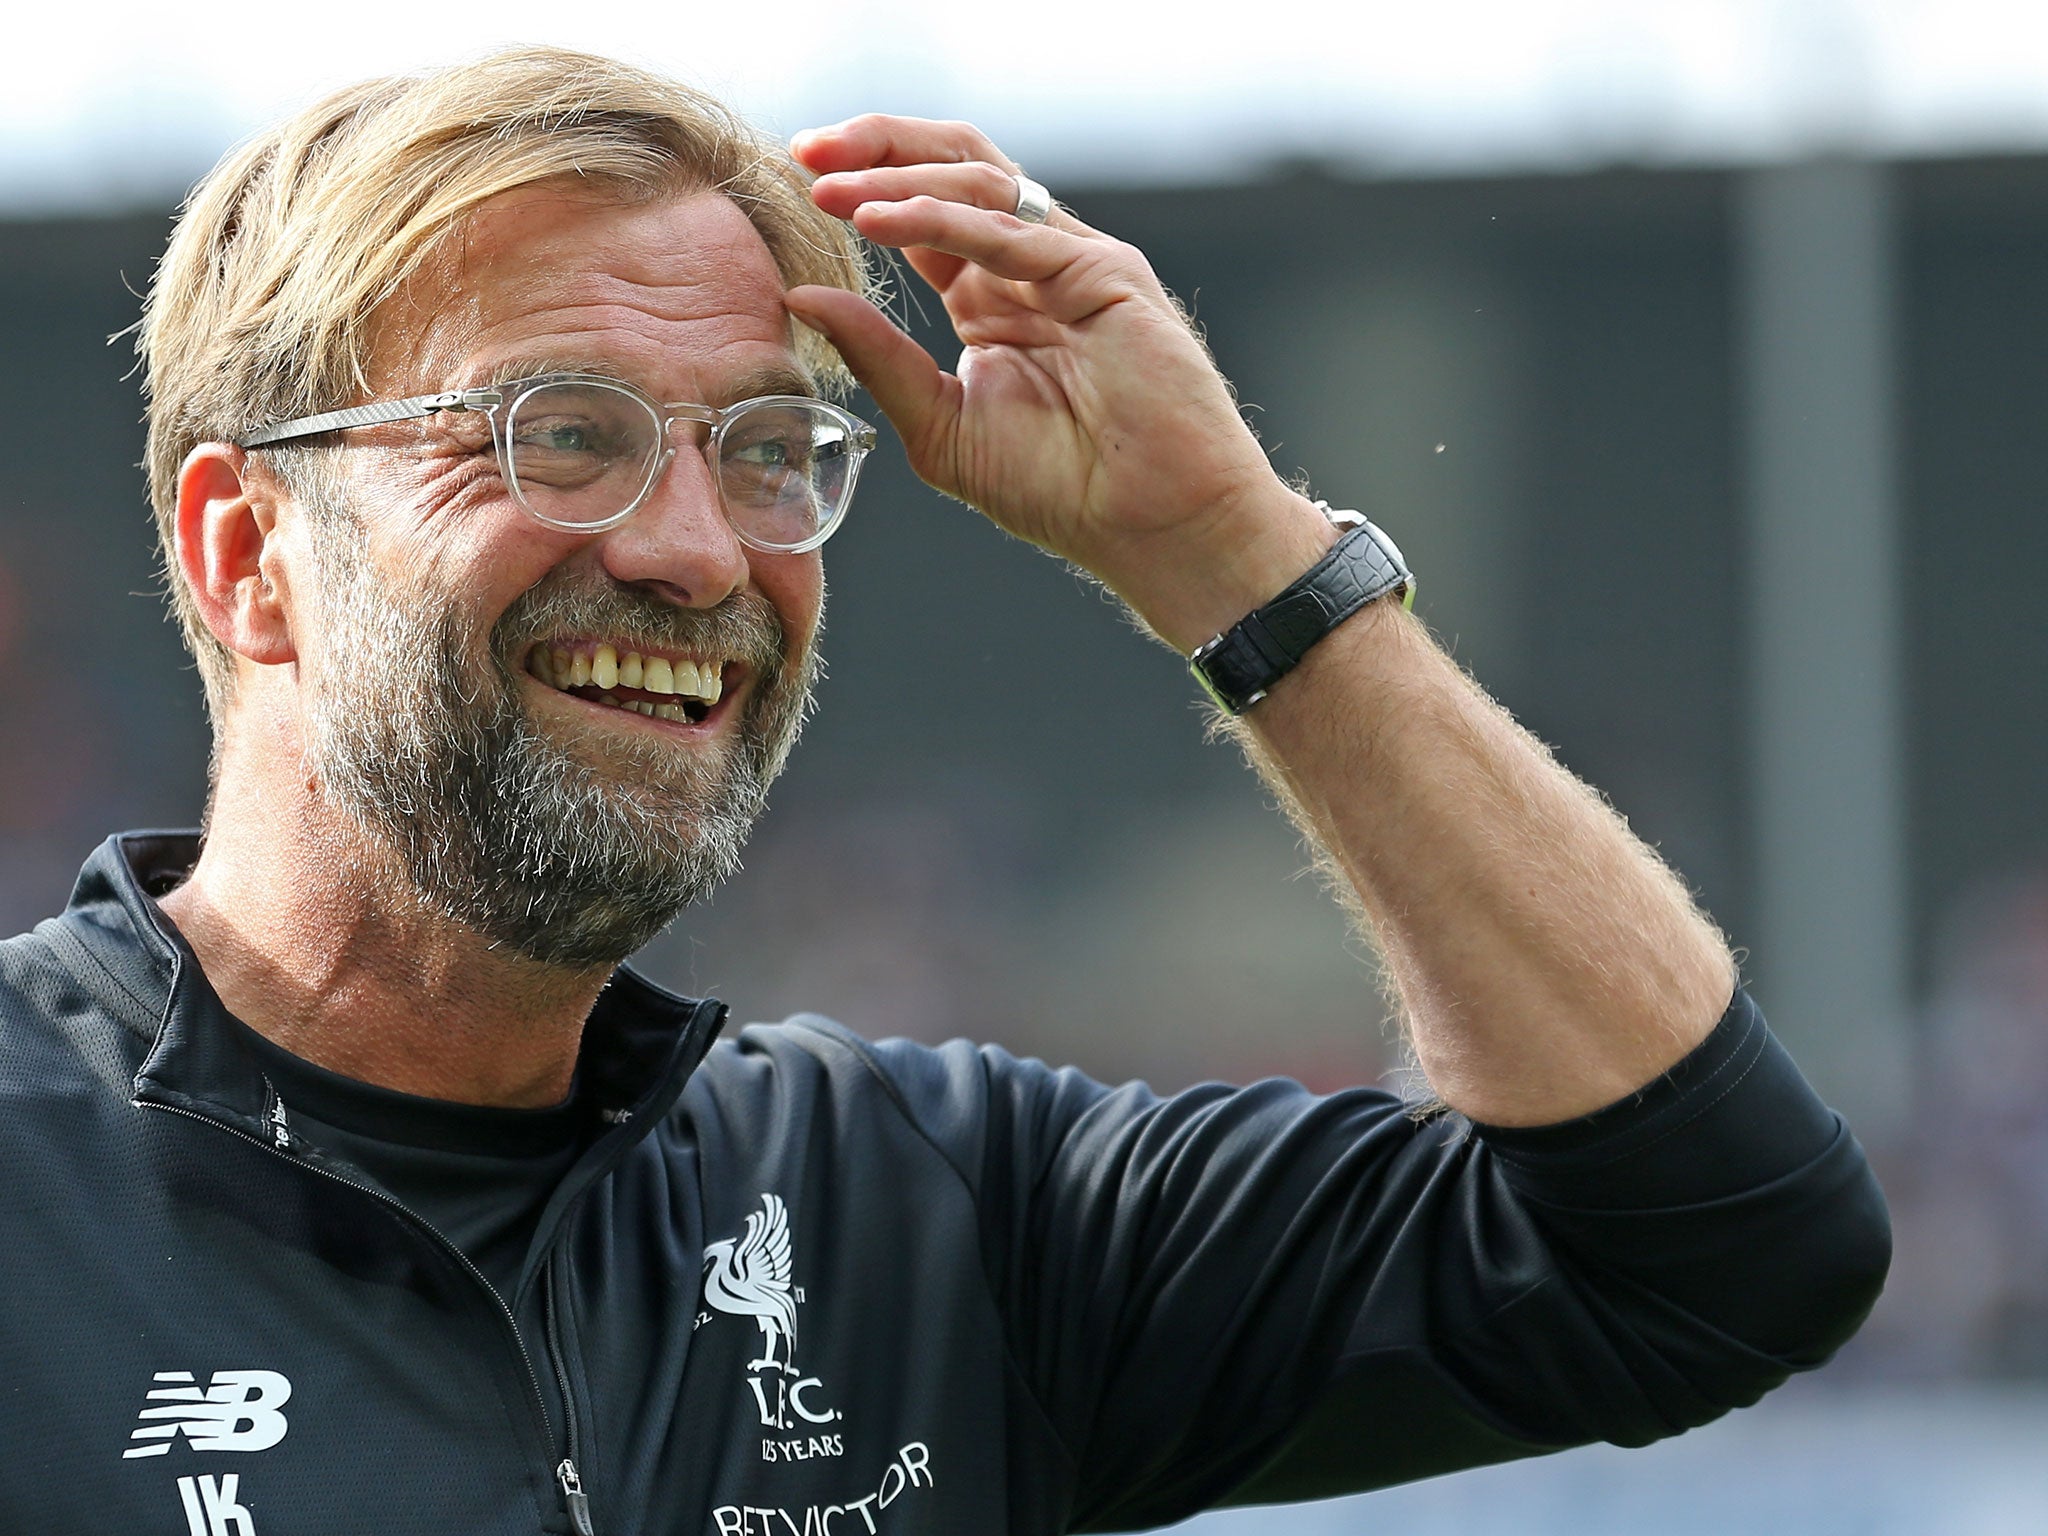 Jurgen Klopp was in a playful move as he joked about Liverpool's next offer for Naby Keita